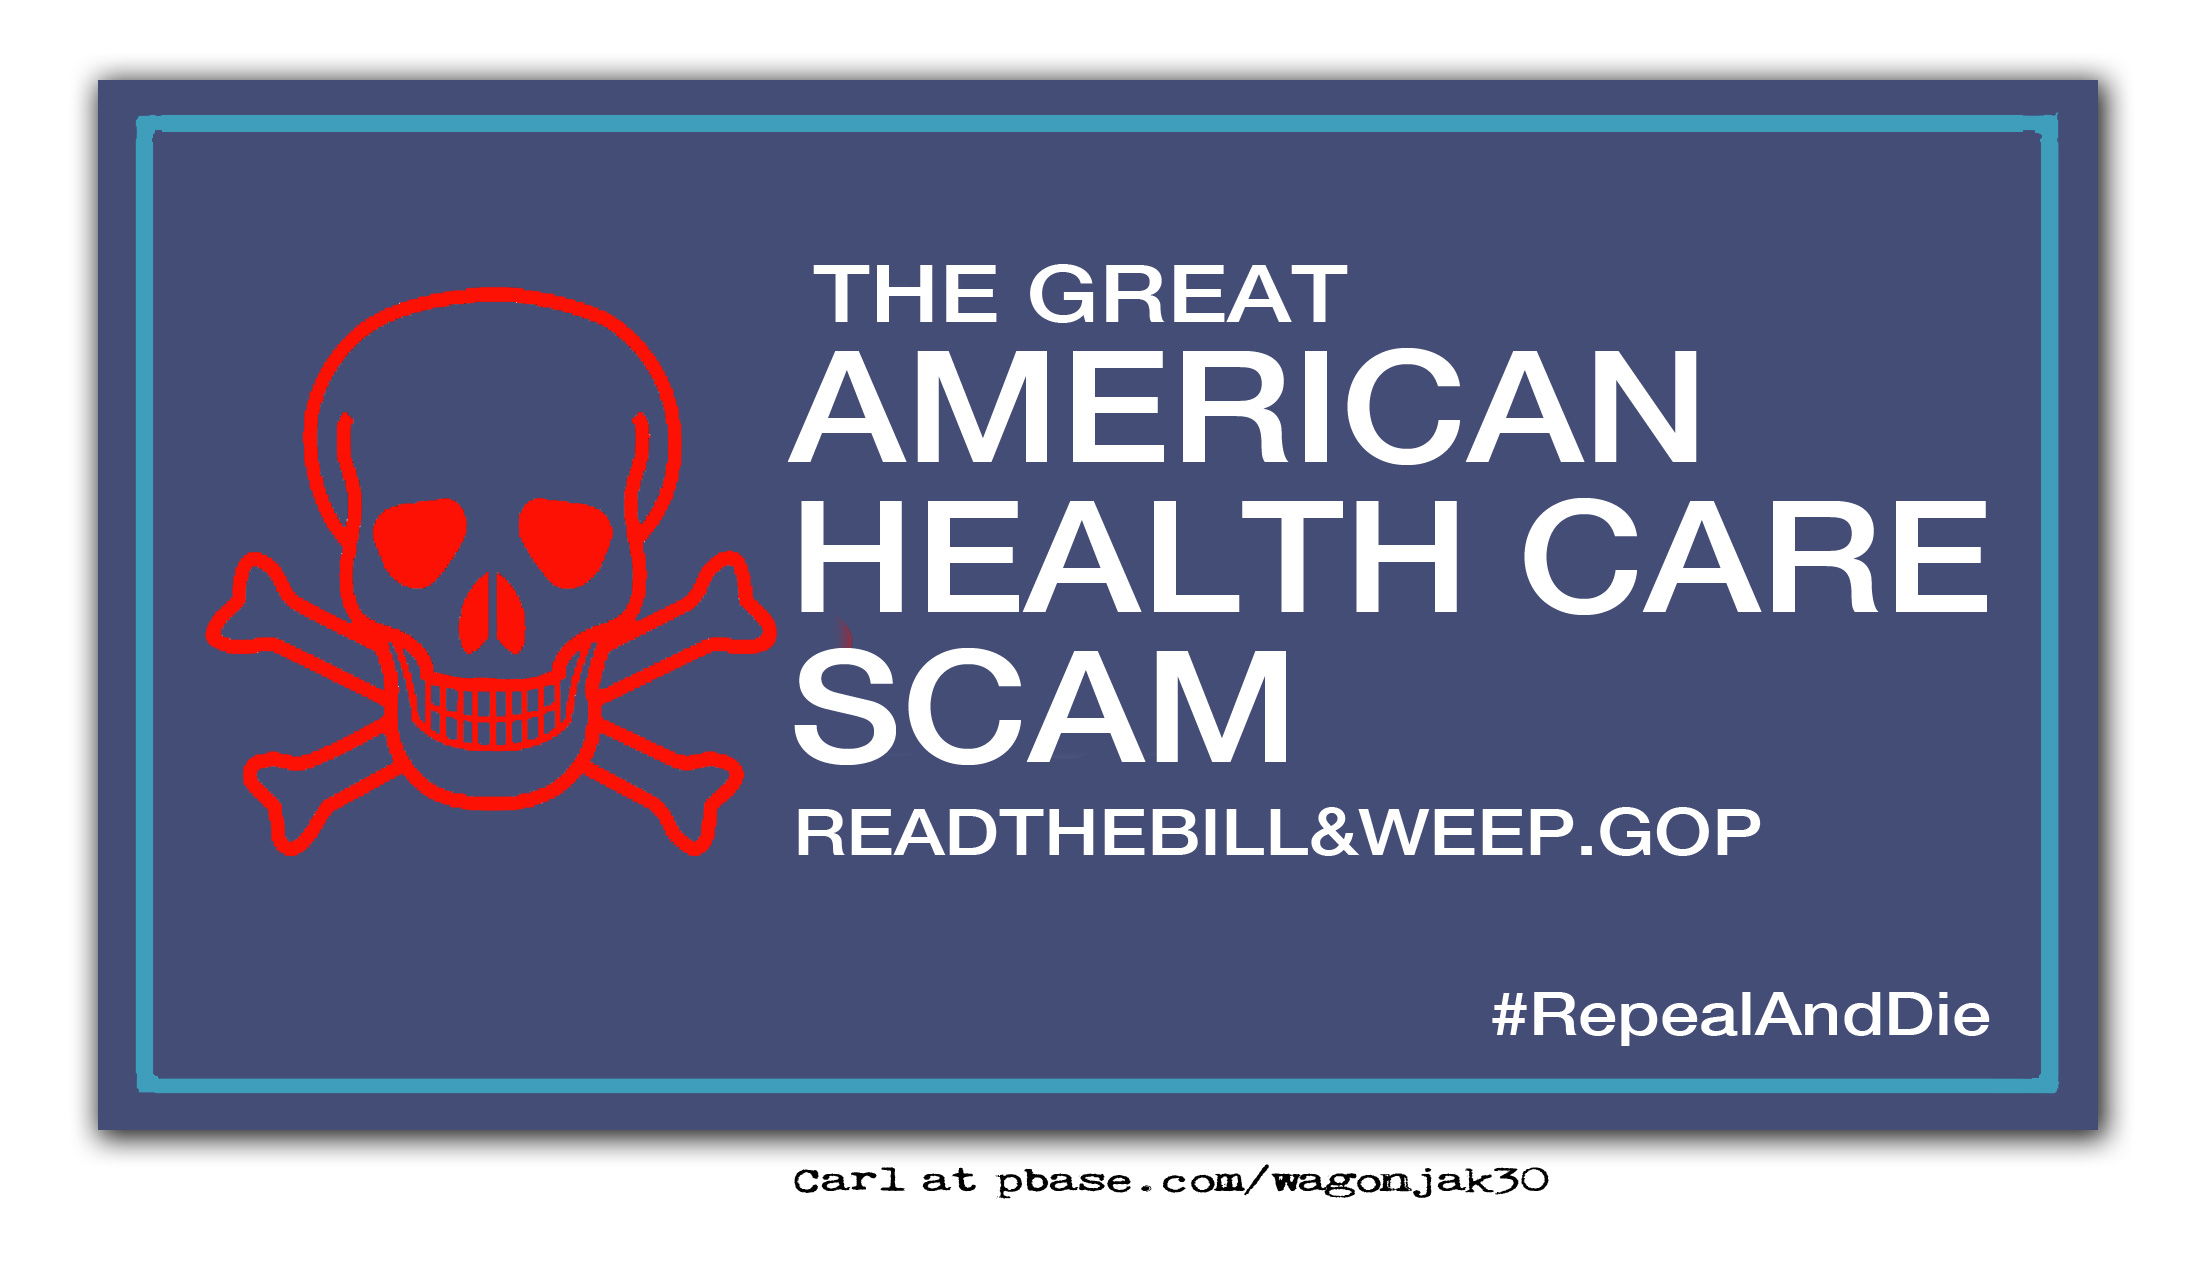 The Great American Health Care Scam poster